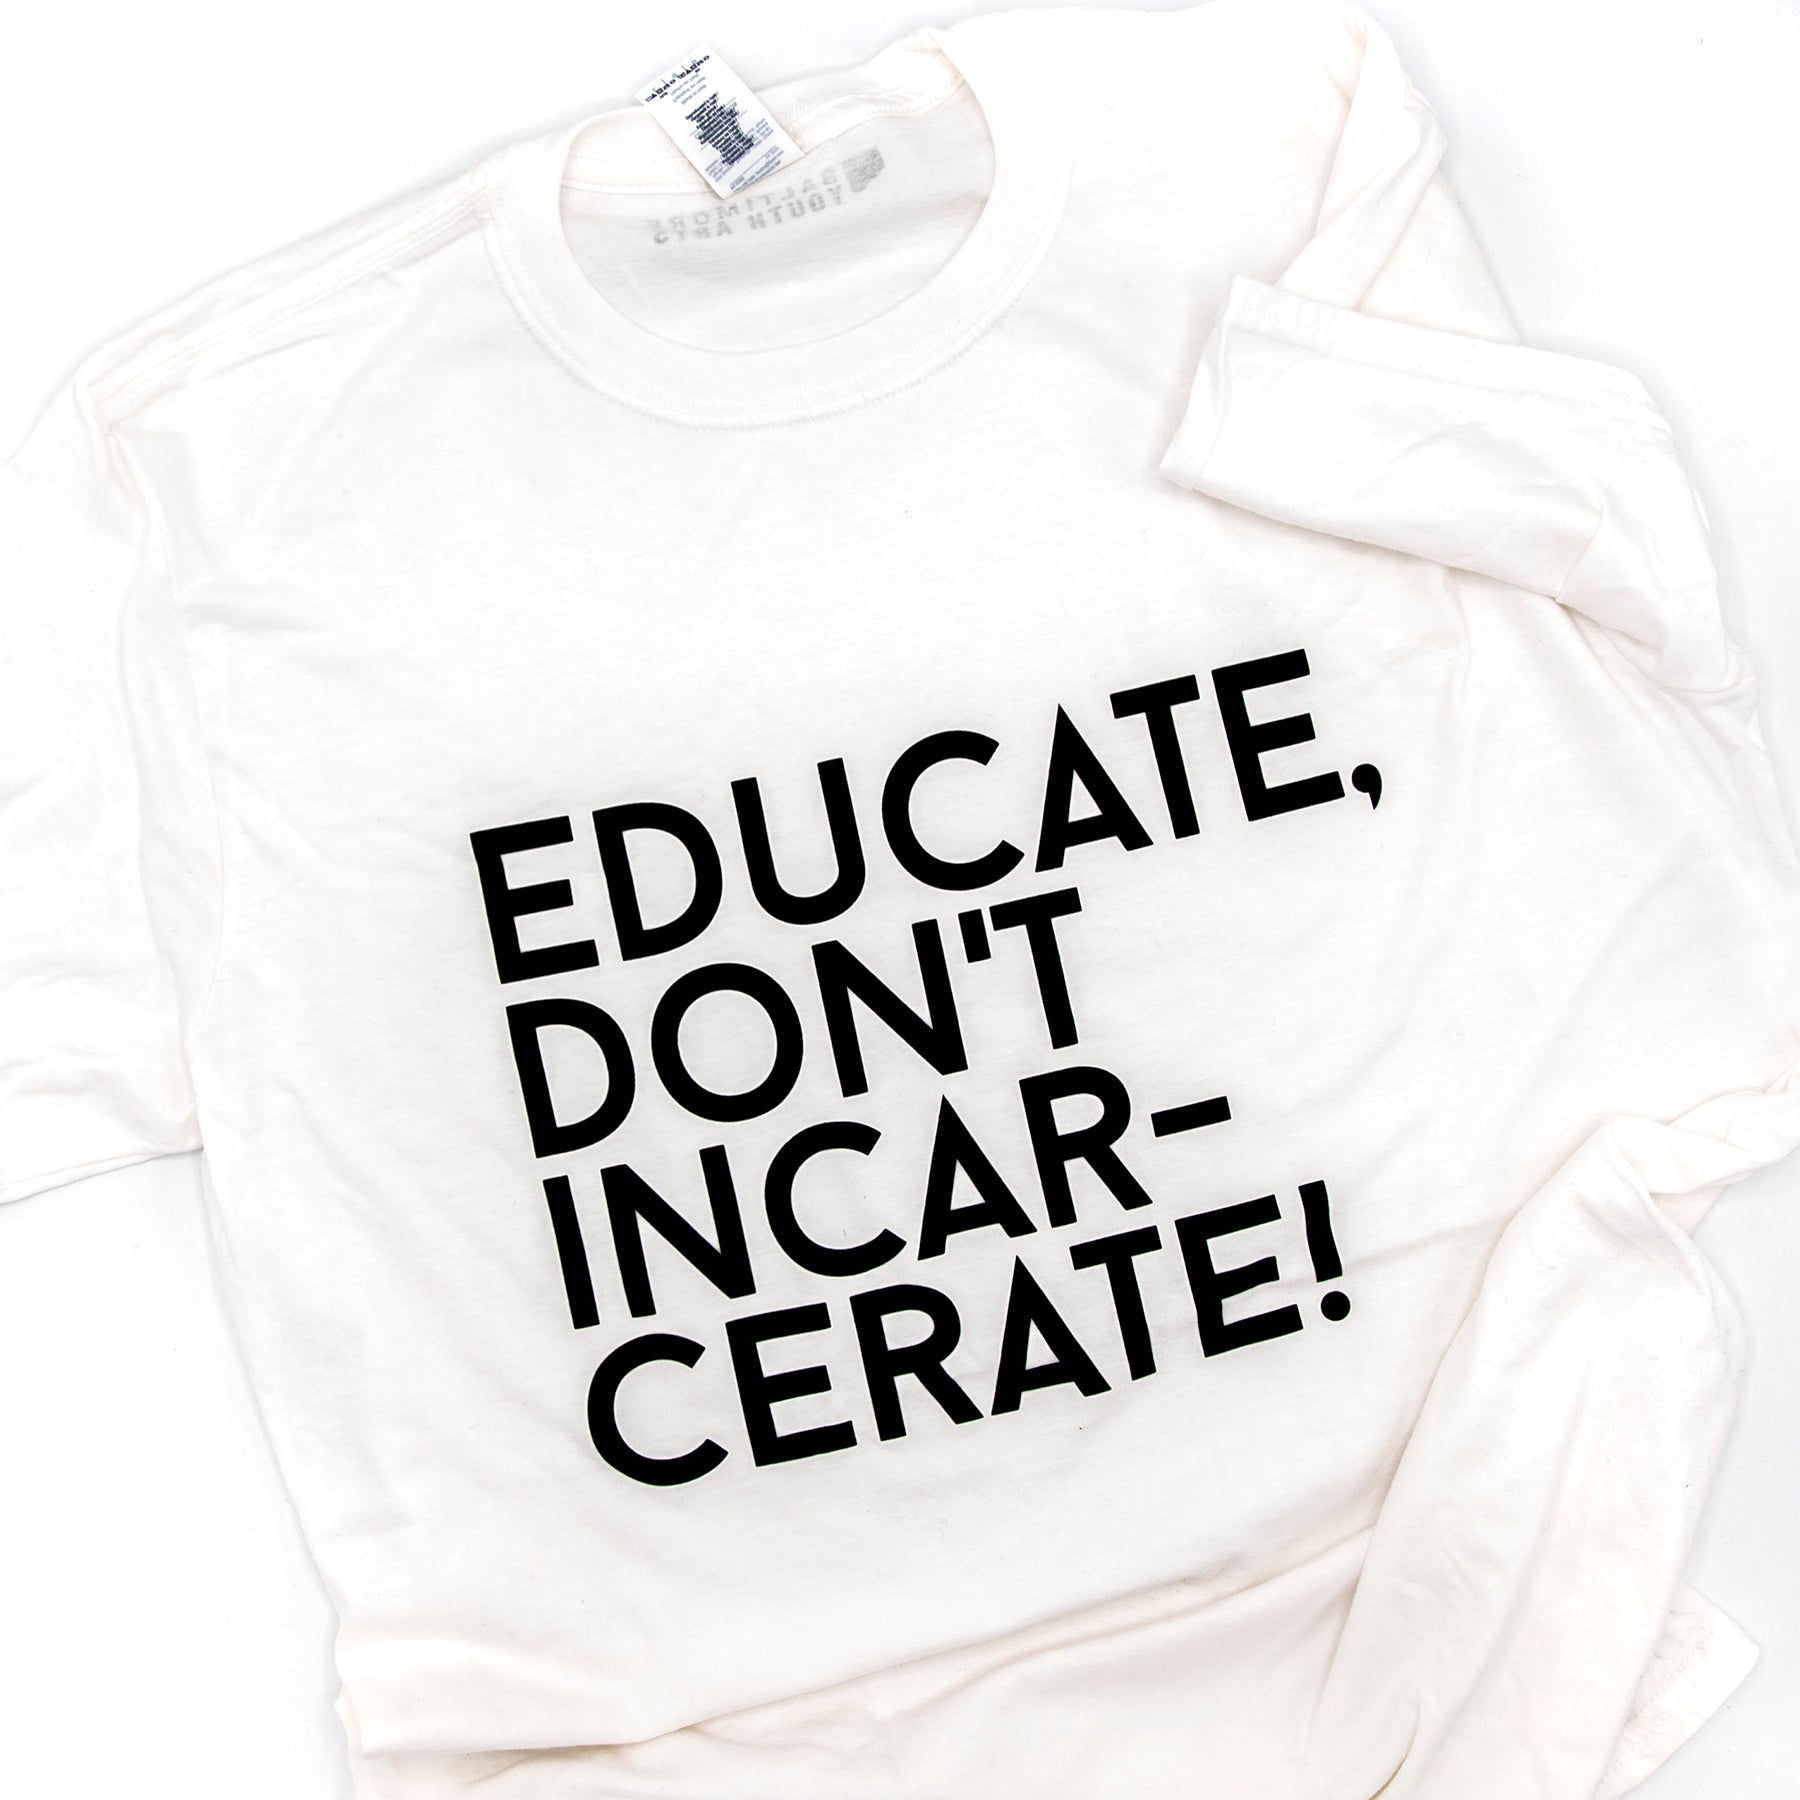 Baltimore Youth Arts Educate Don't Incarcerate T-Shirt